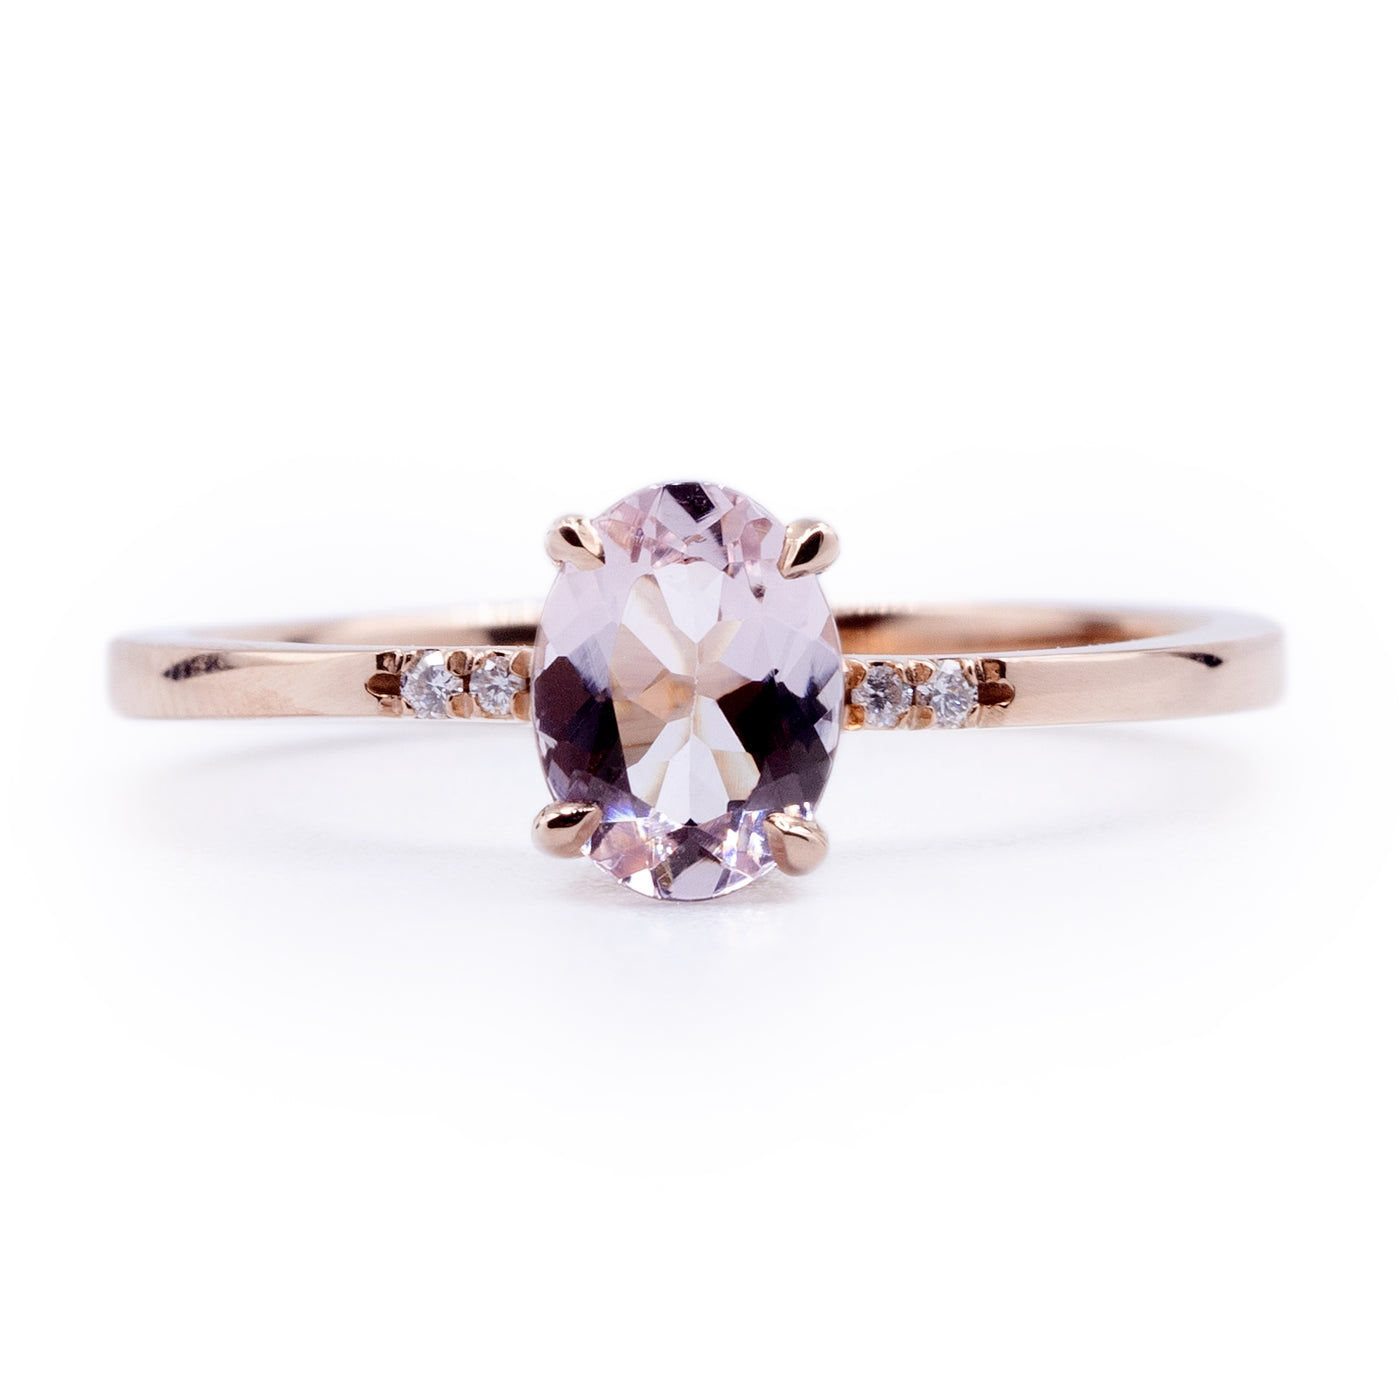 Oval Morganite Ring with Petite Diamond Accents & Hidden Halo